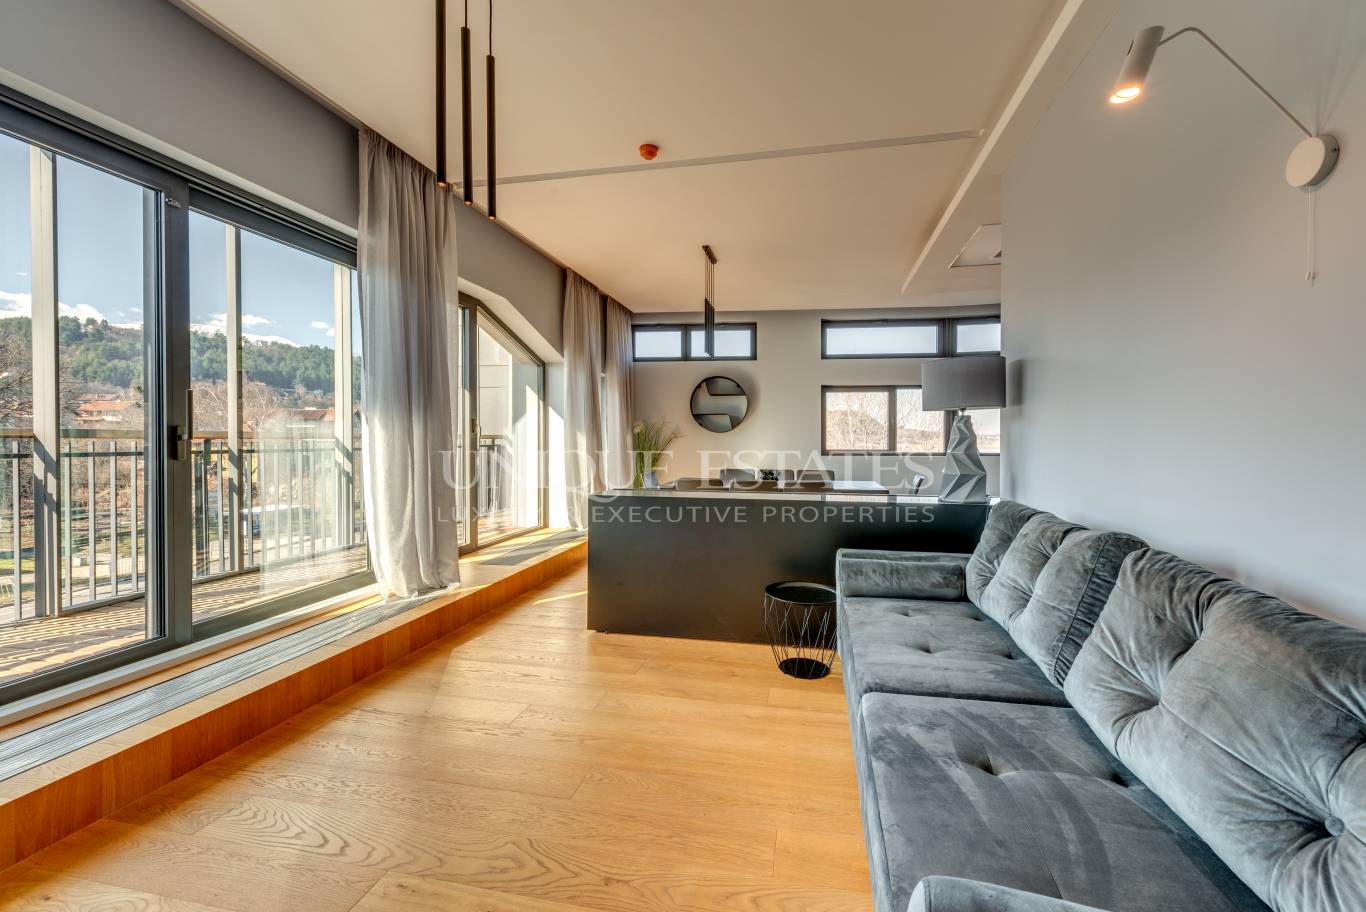 Apartment for sale in Sofia, Pancharevo with listing ID: K14508 - image 14